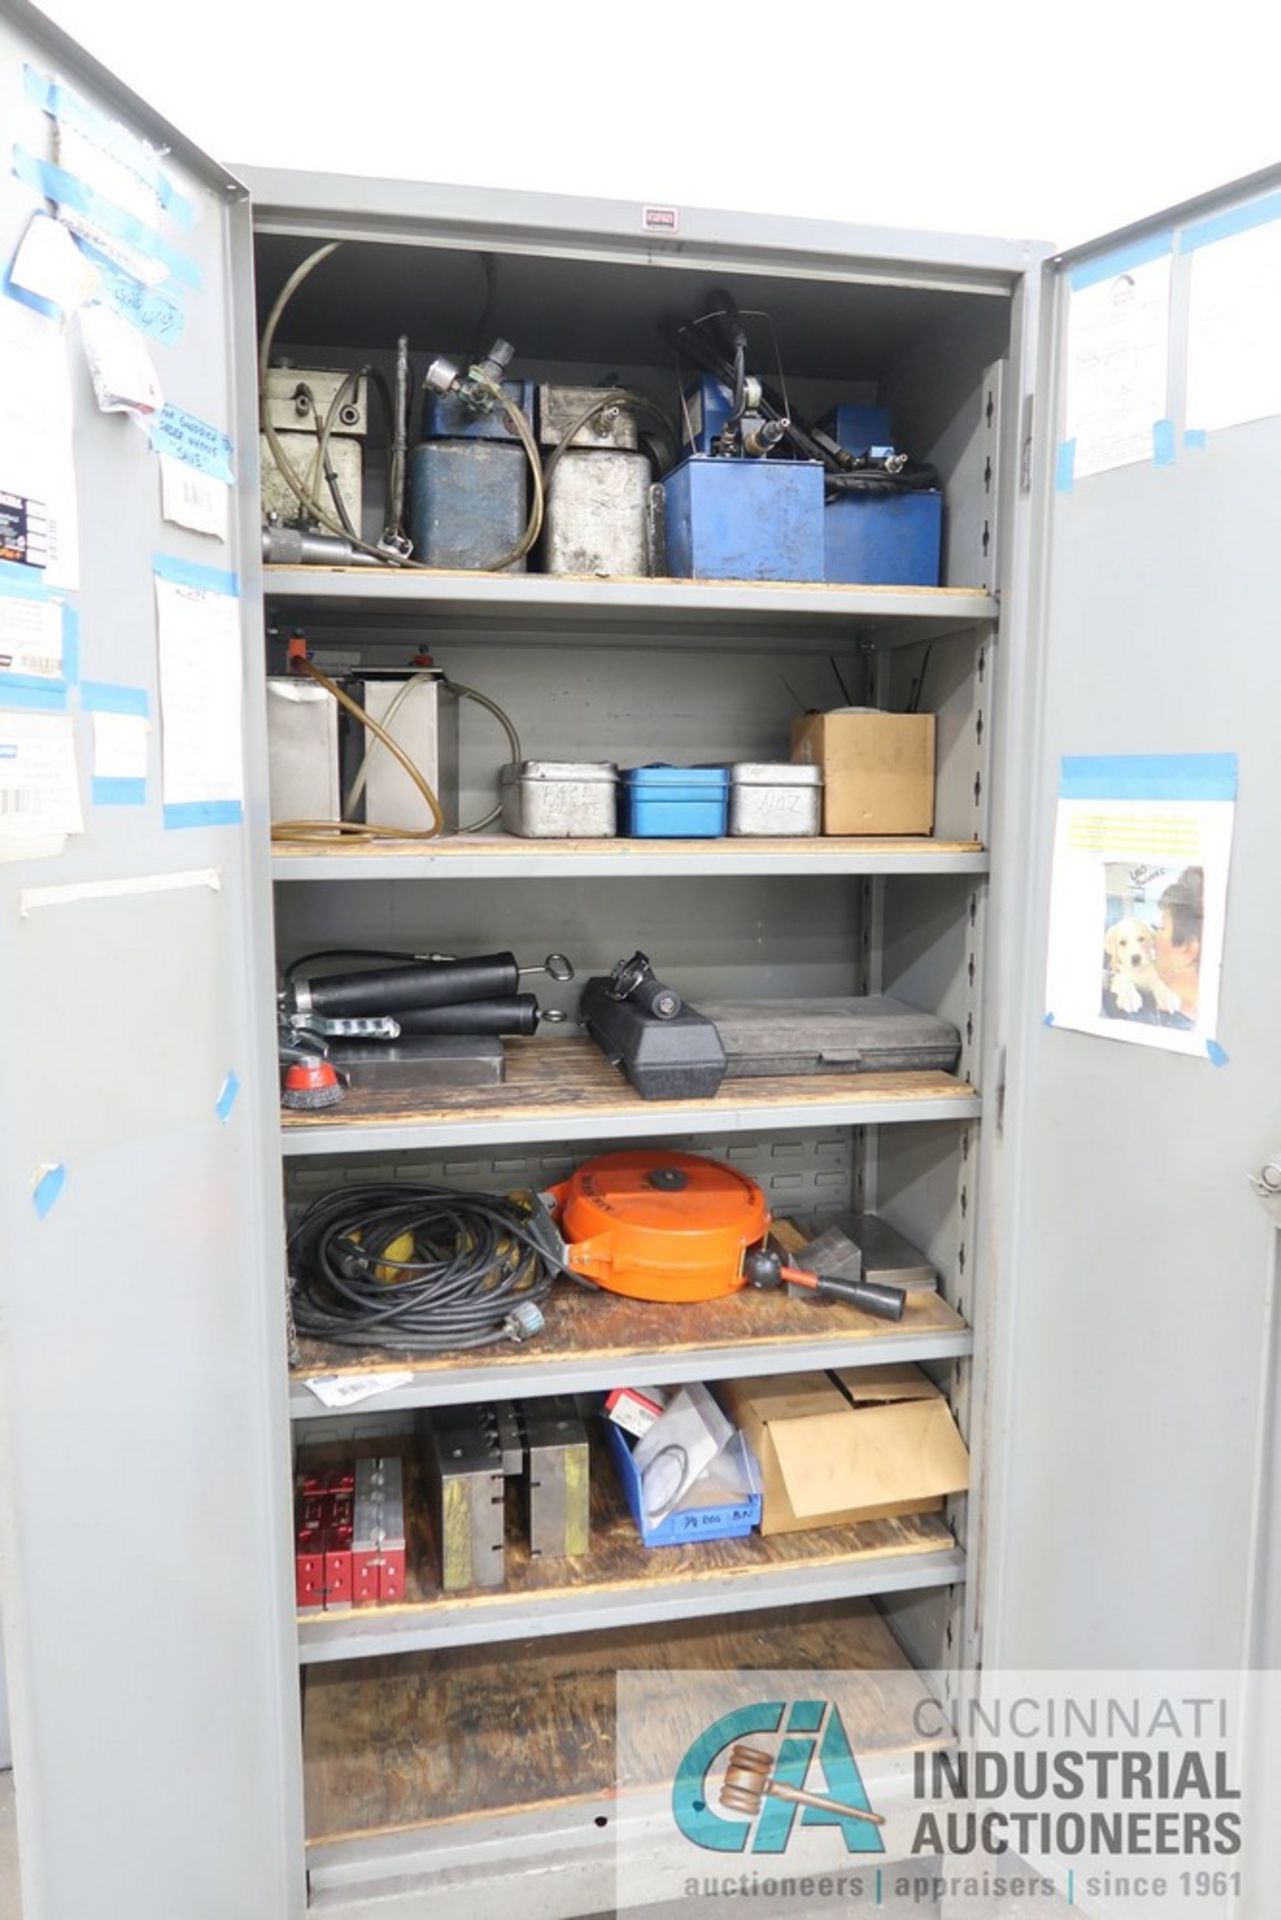 (LOT) MISCELLANEOUS MACHINE ACCESSORIES AND SHOP EQUIPMENT WITH LYON STORAGE CABINET - Image 2 of 5